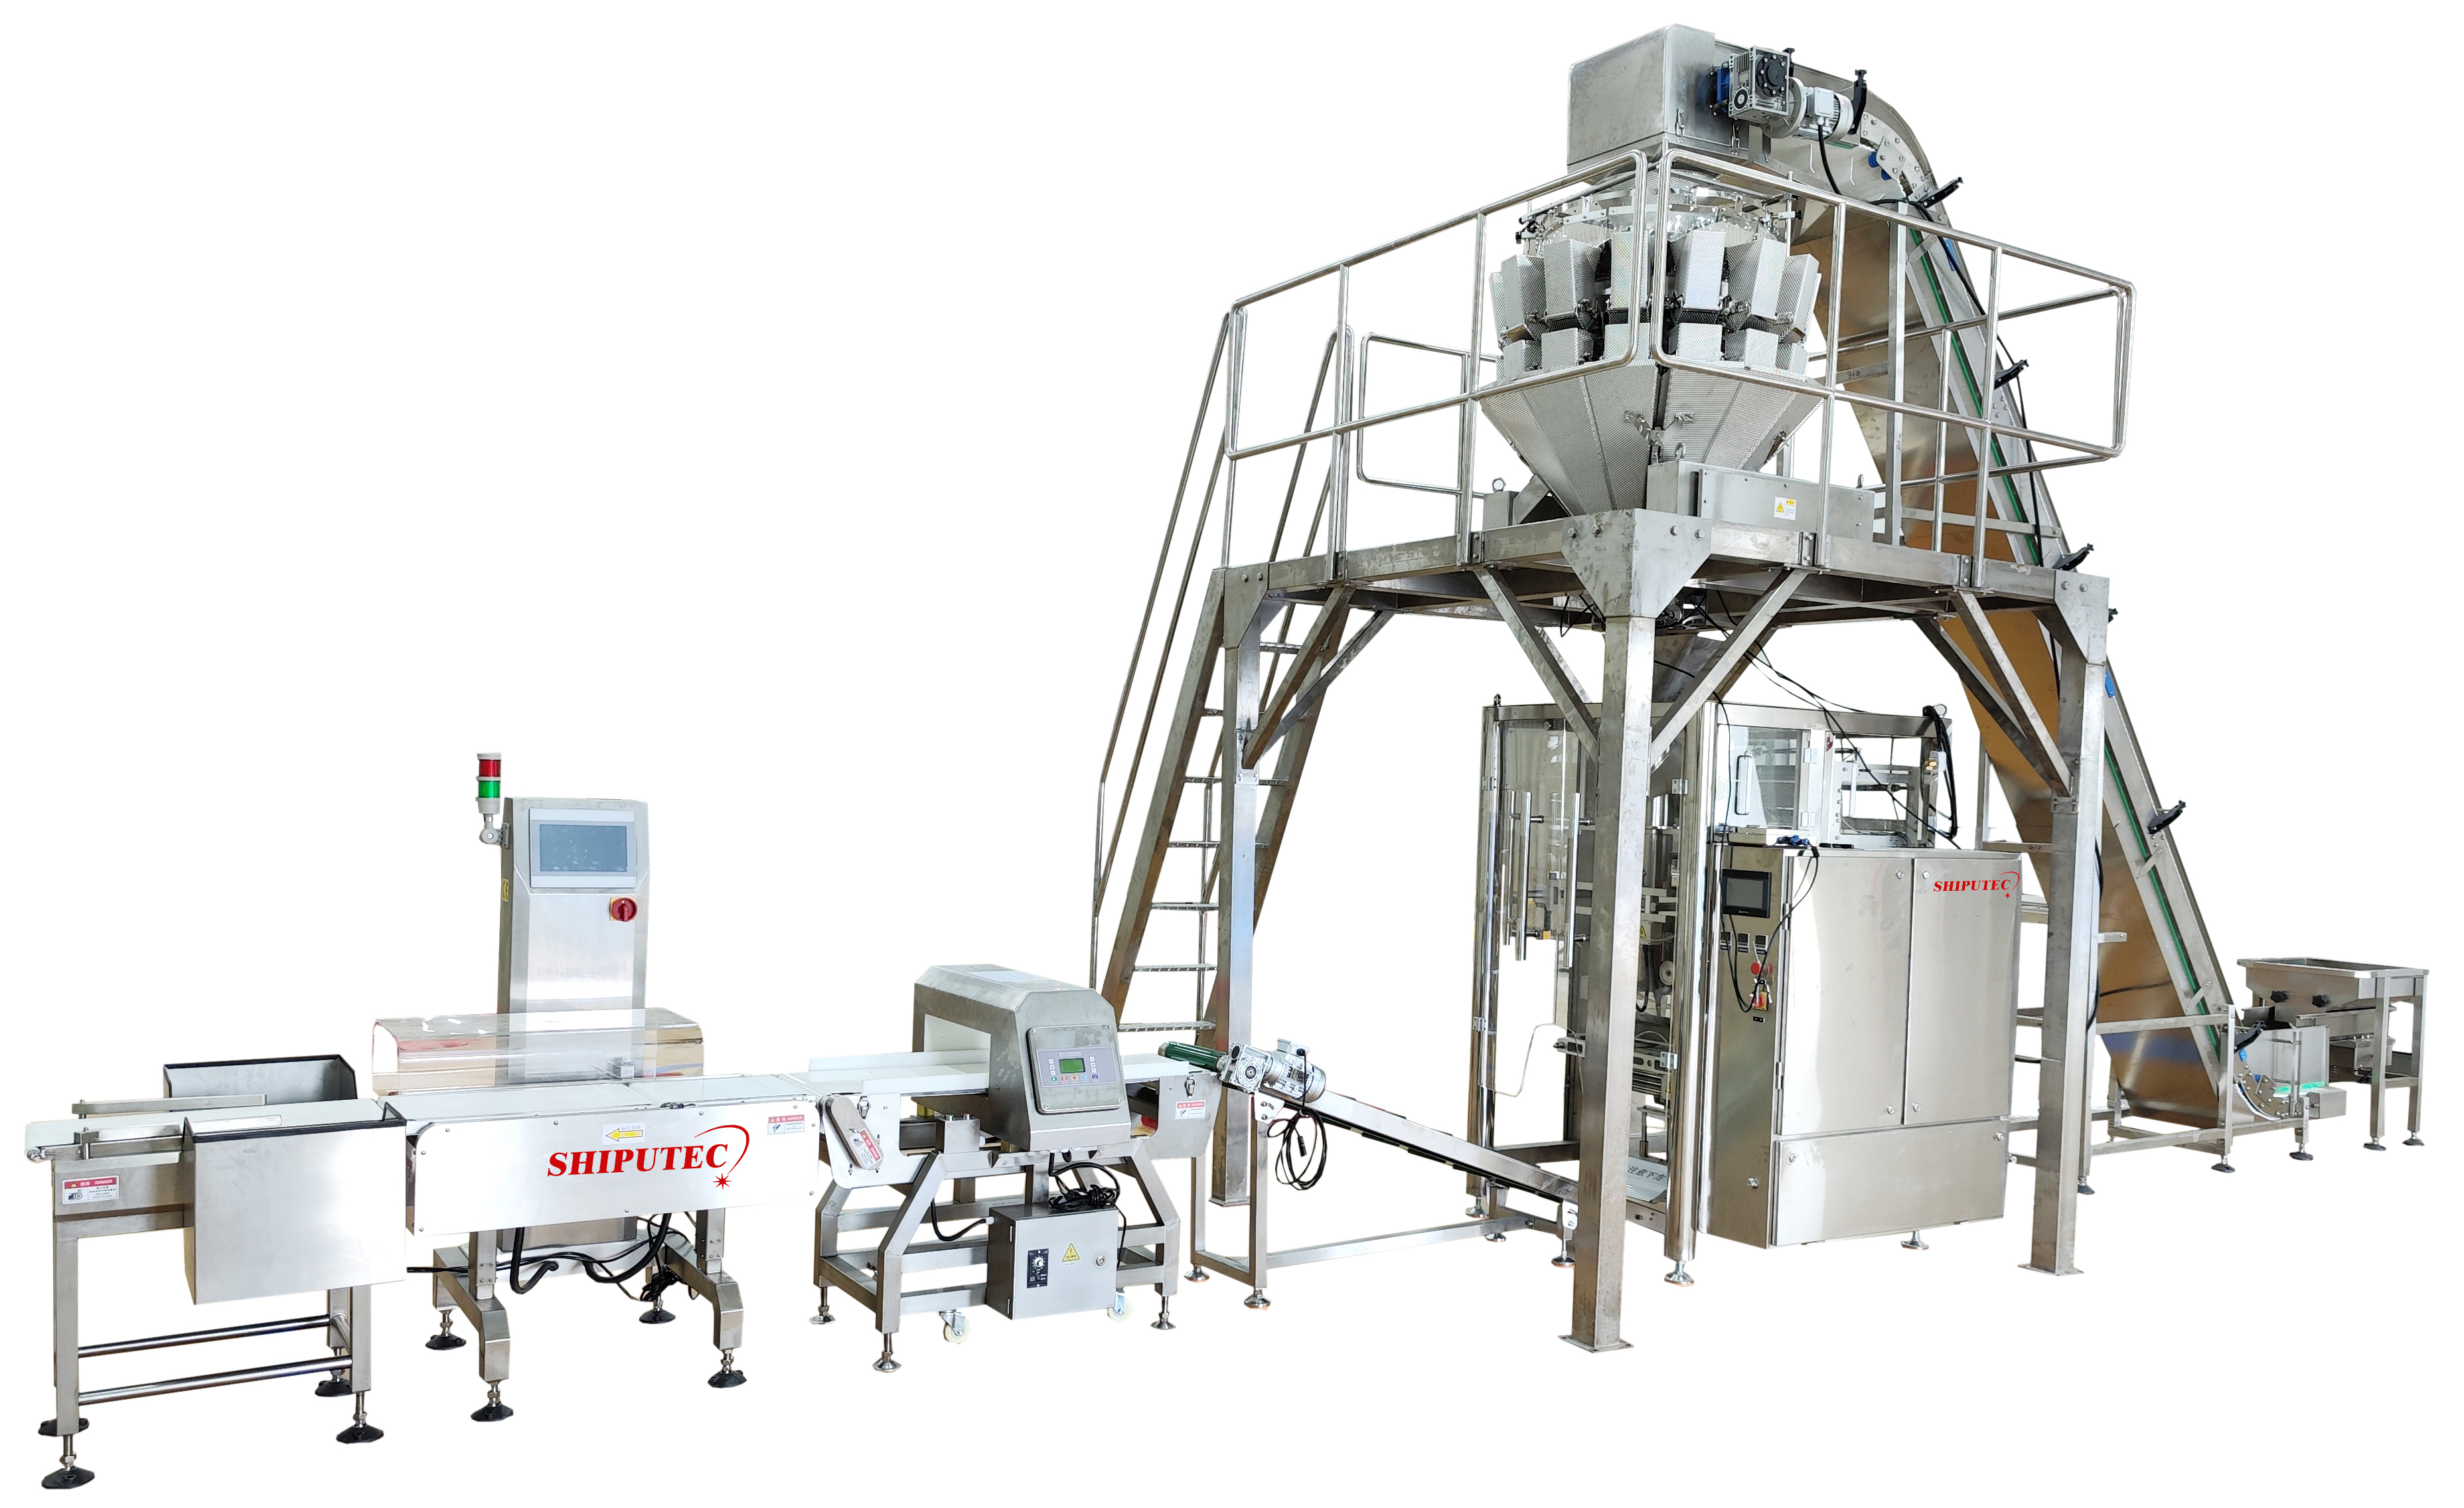 Can filling, seaming equipment supporting flexible operations, safe practices | Beverage Industry